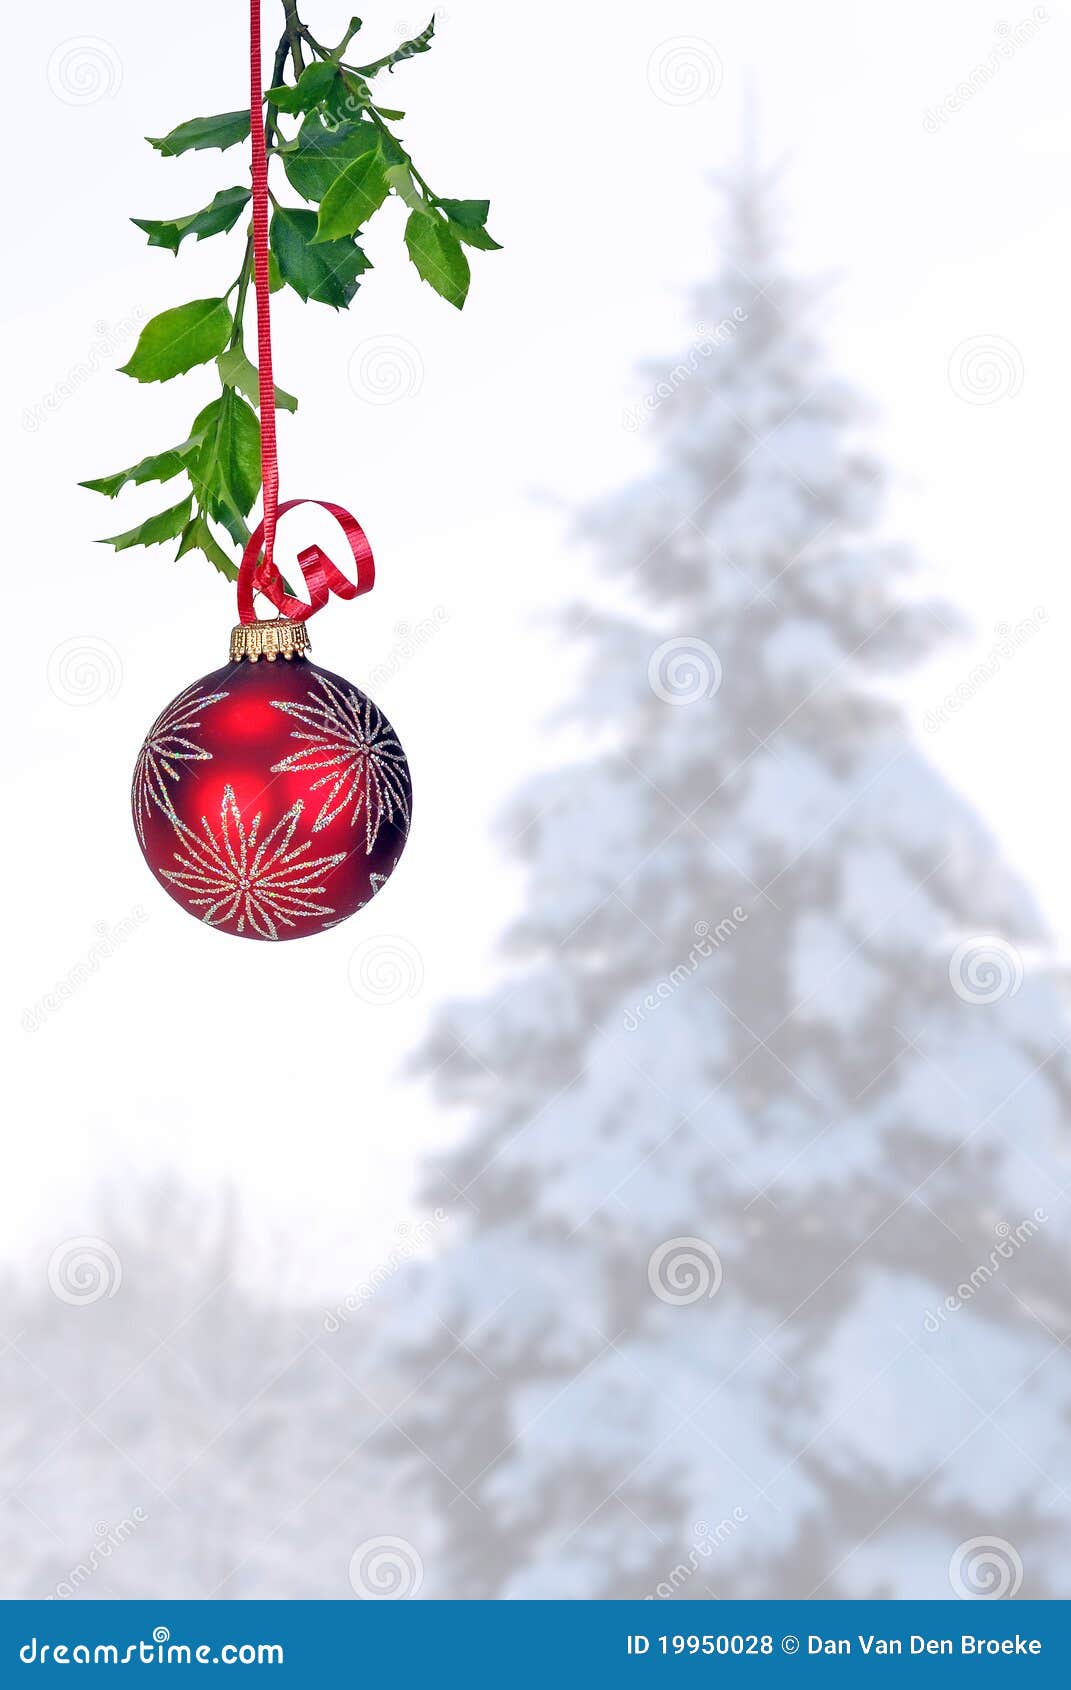 Hanging Red Ornament Against Winter Background Royalty ...
